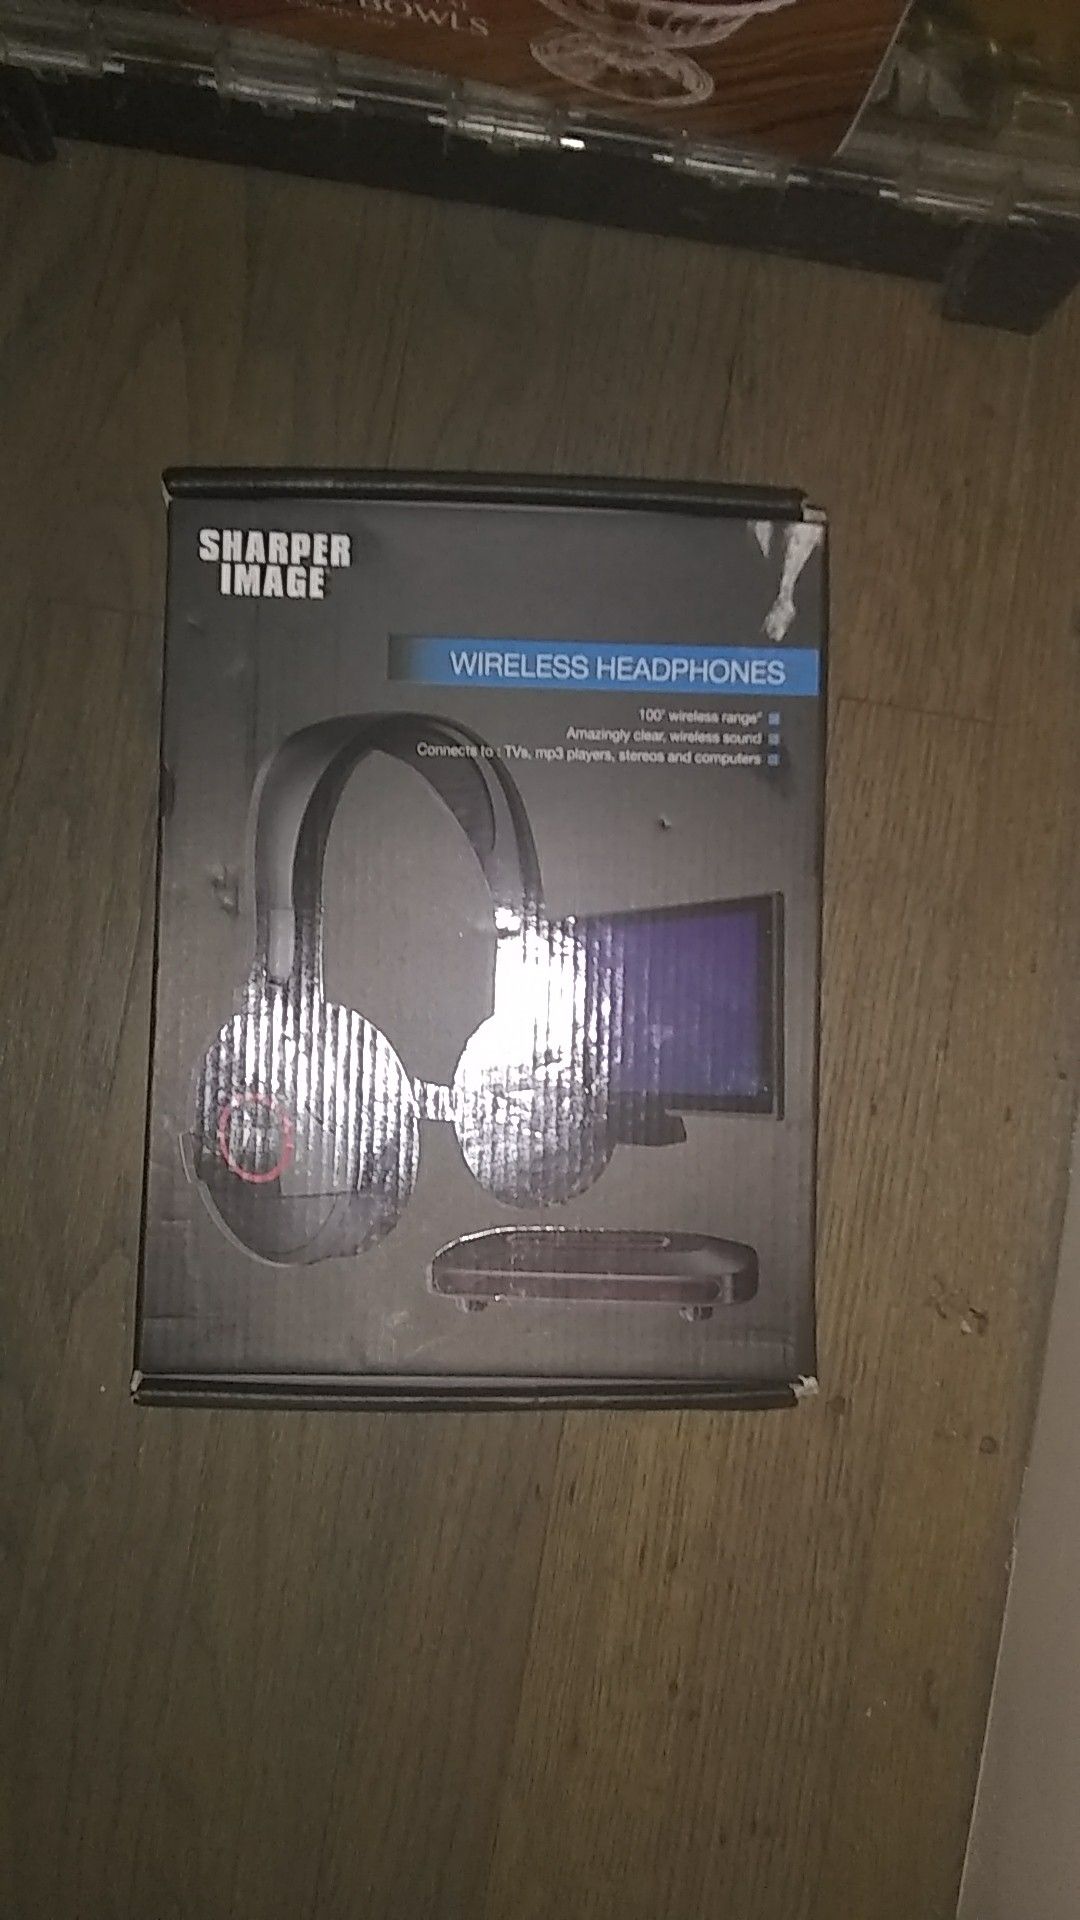 Wireless Bluetooth headphones with router From Shaper Image